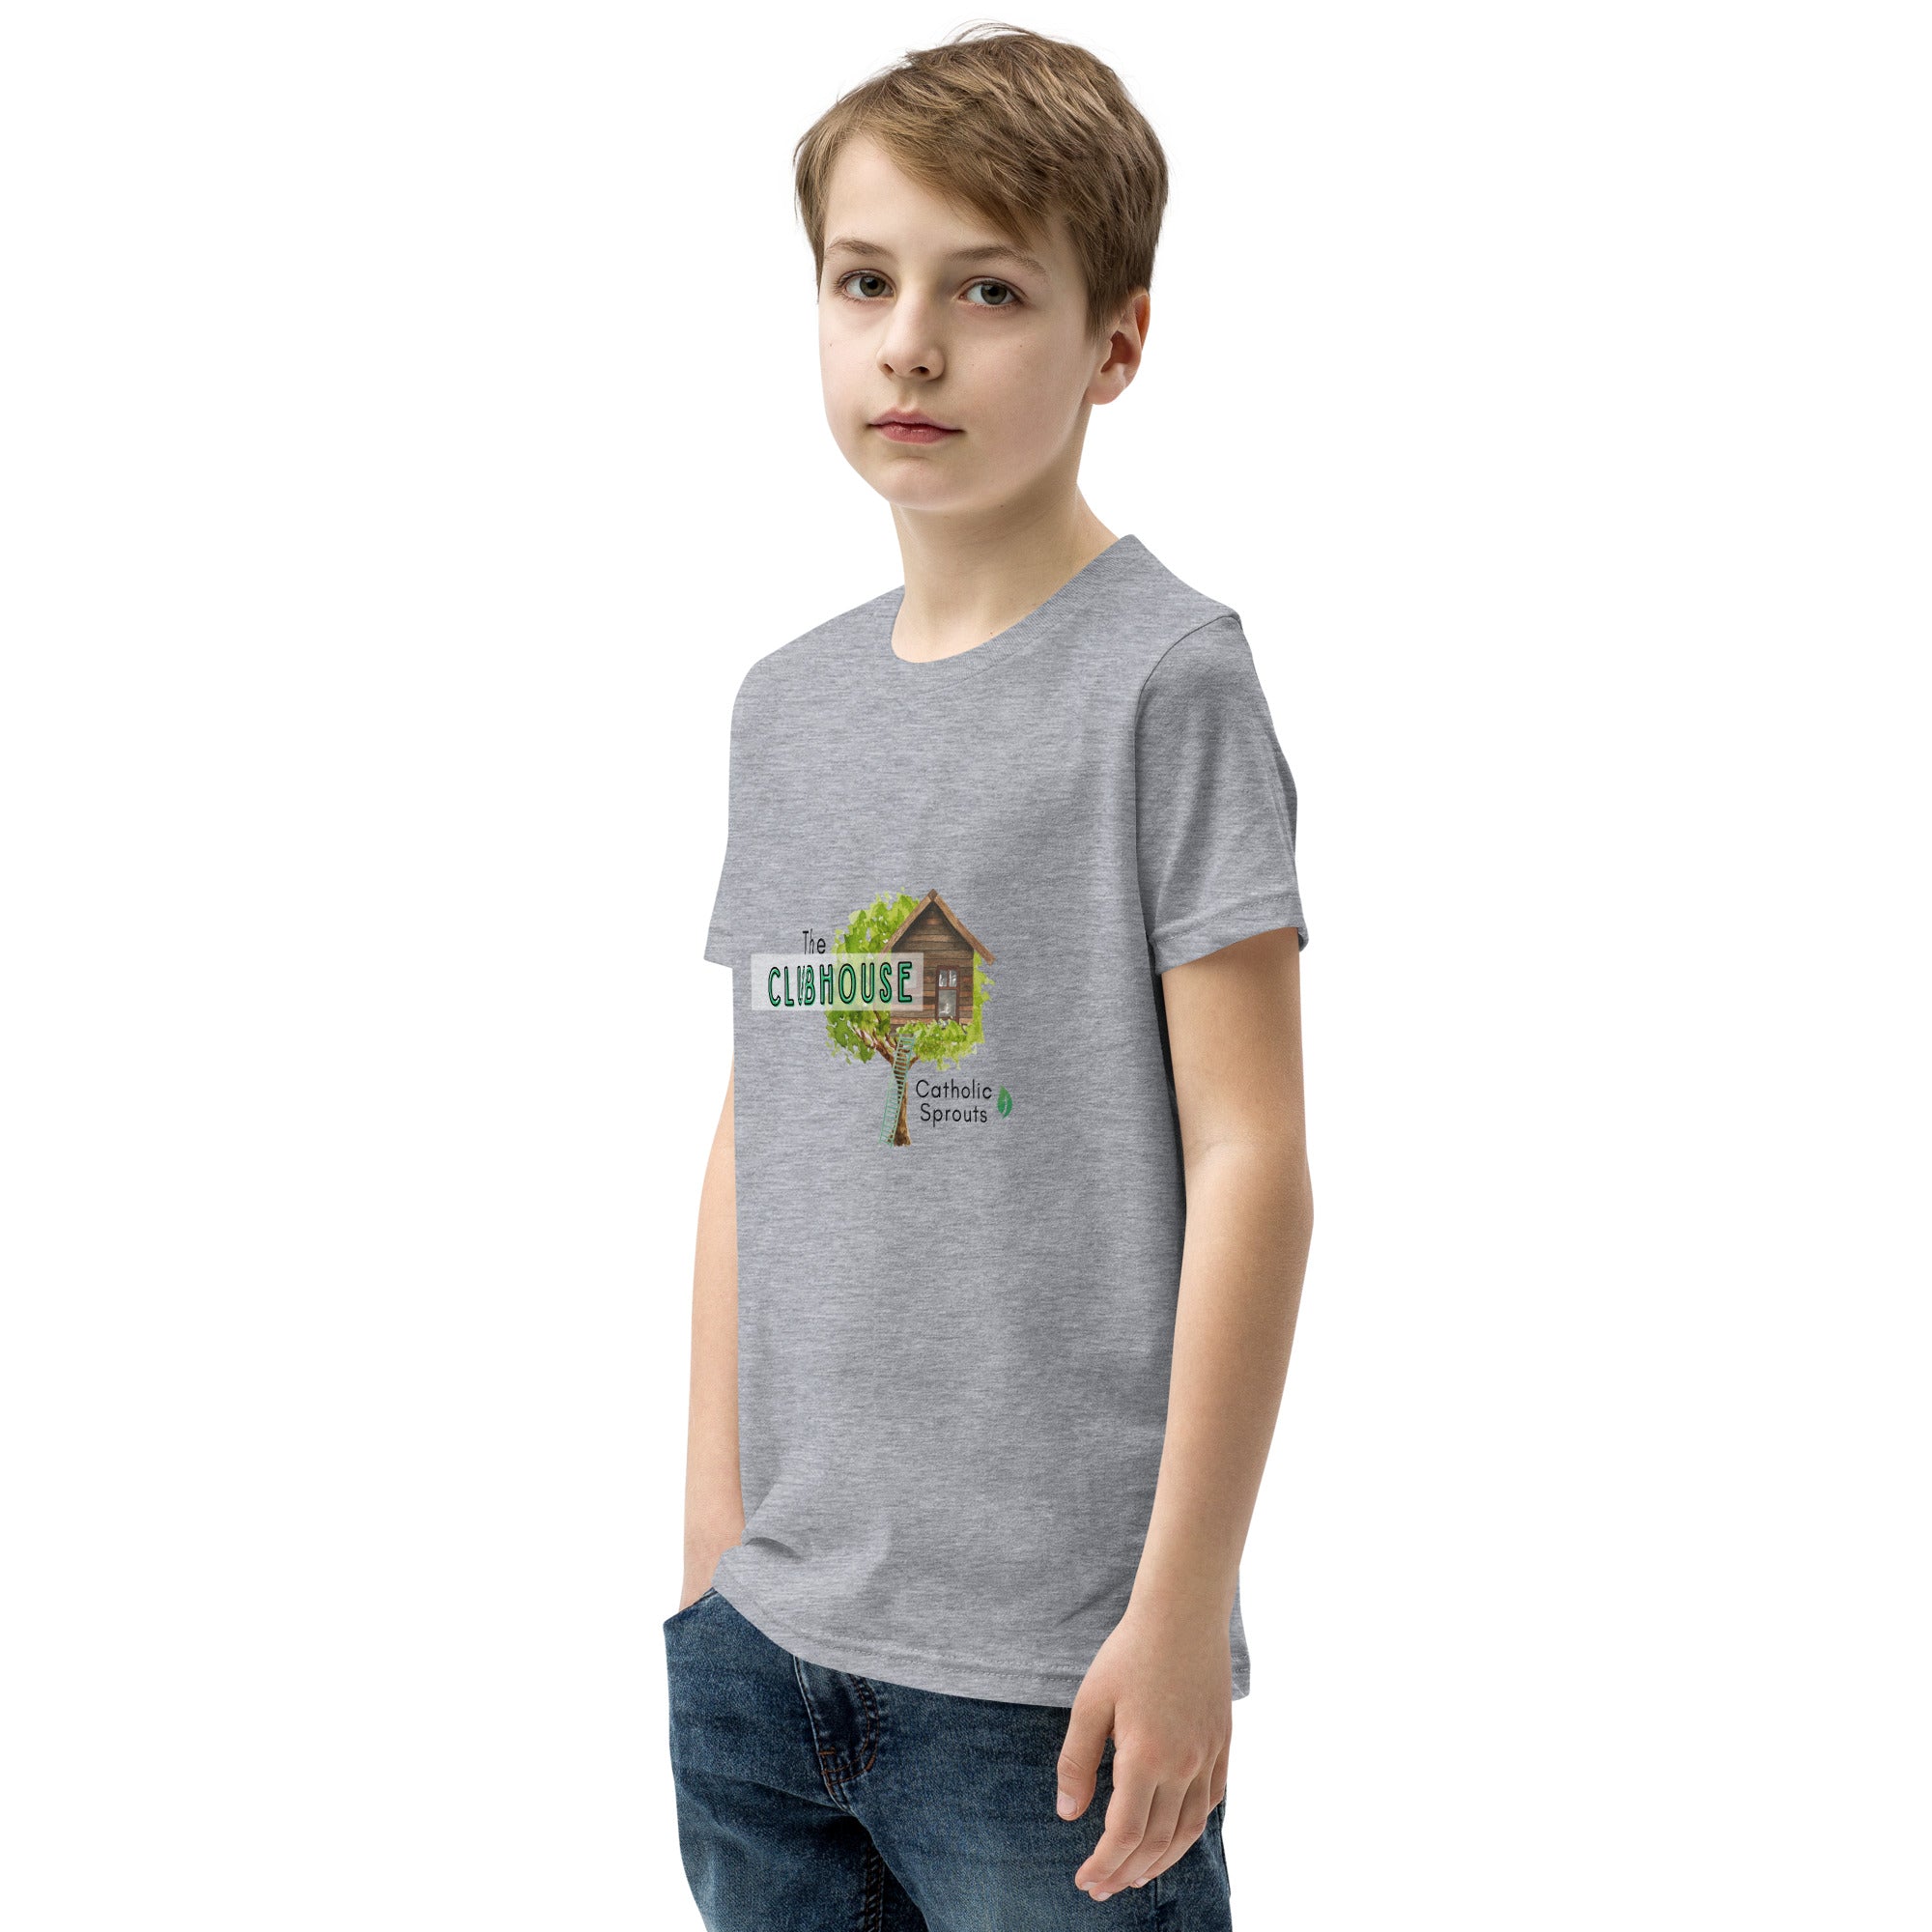 Clubhouse Member T-Shirt: Youth Short Sleeve Grey